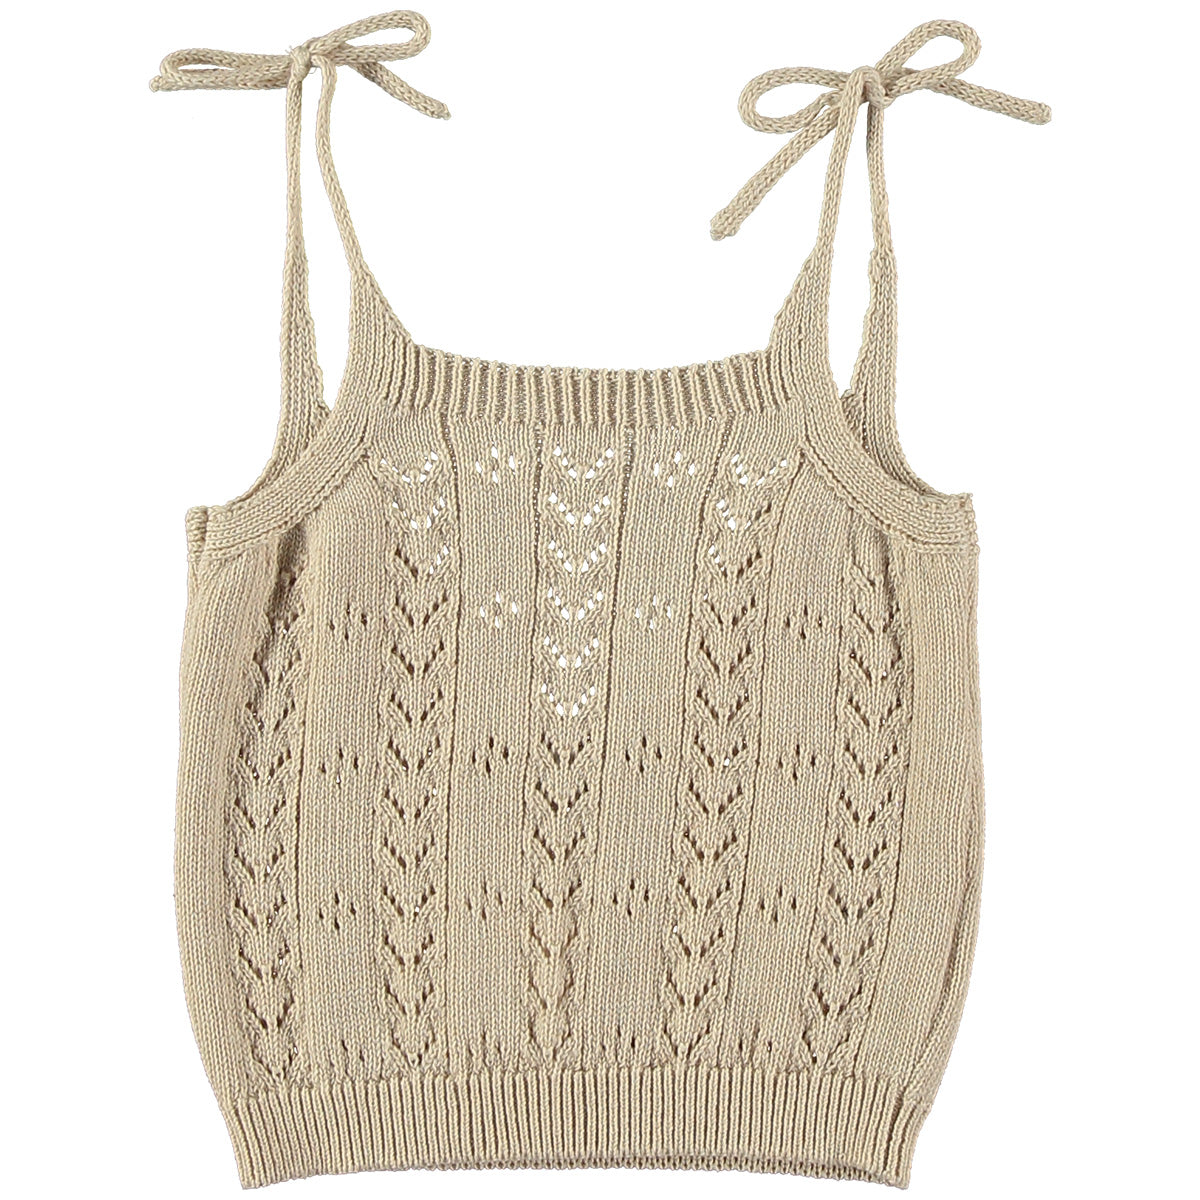 The Openwork Knit Top from Tocoto Vintage. 100% organic cotton tank top with openwork knit design and low back neckline.